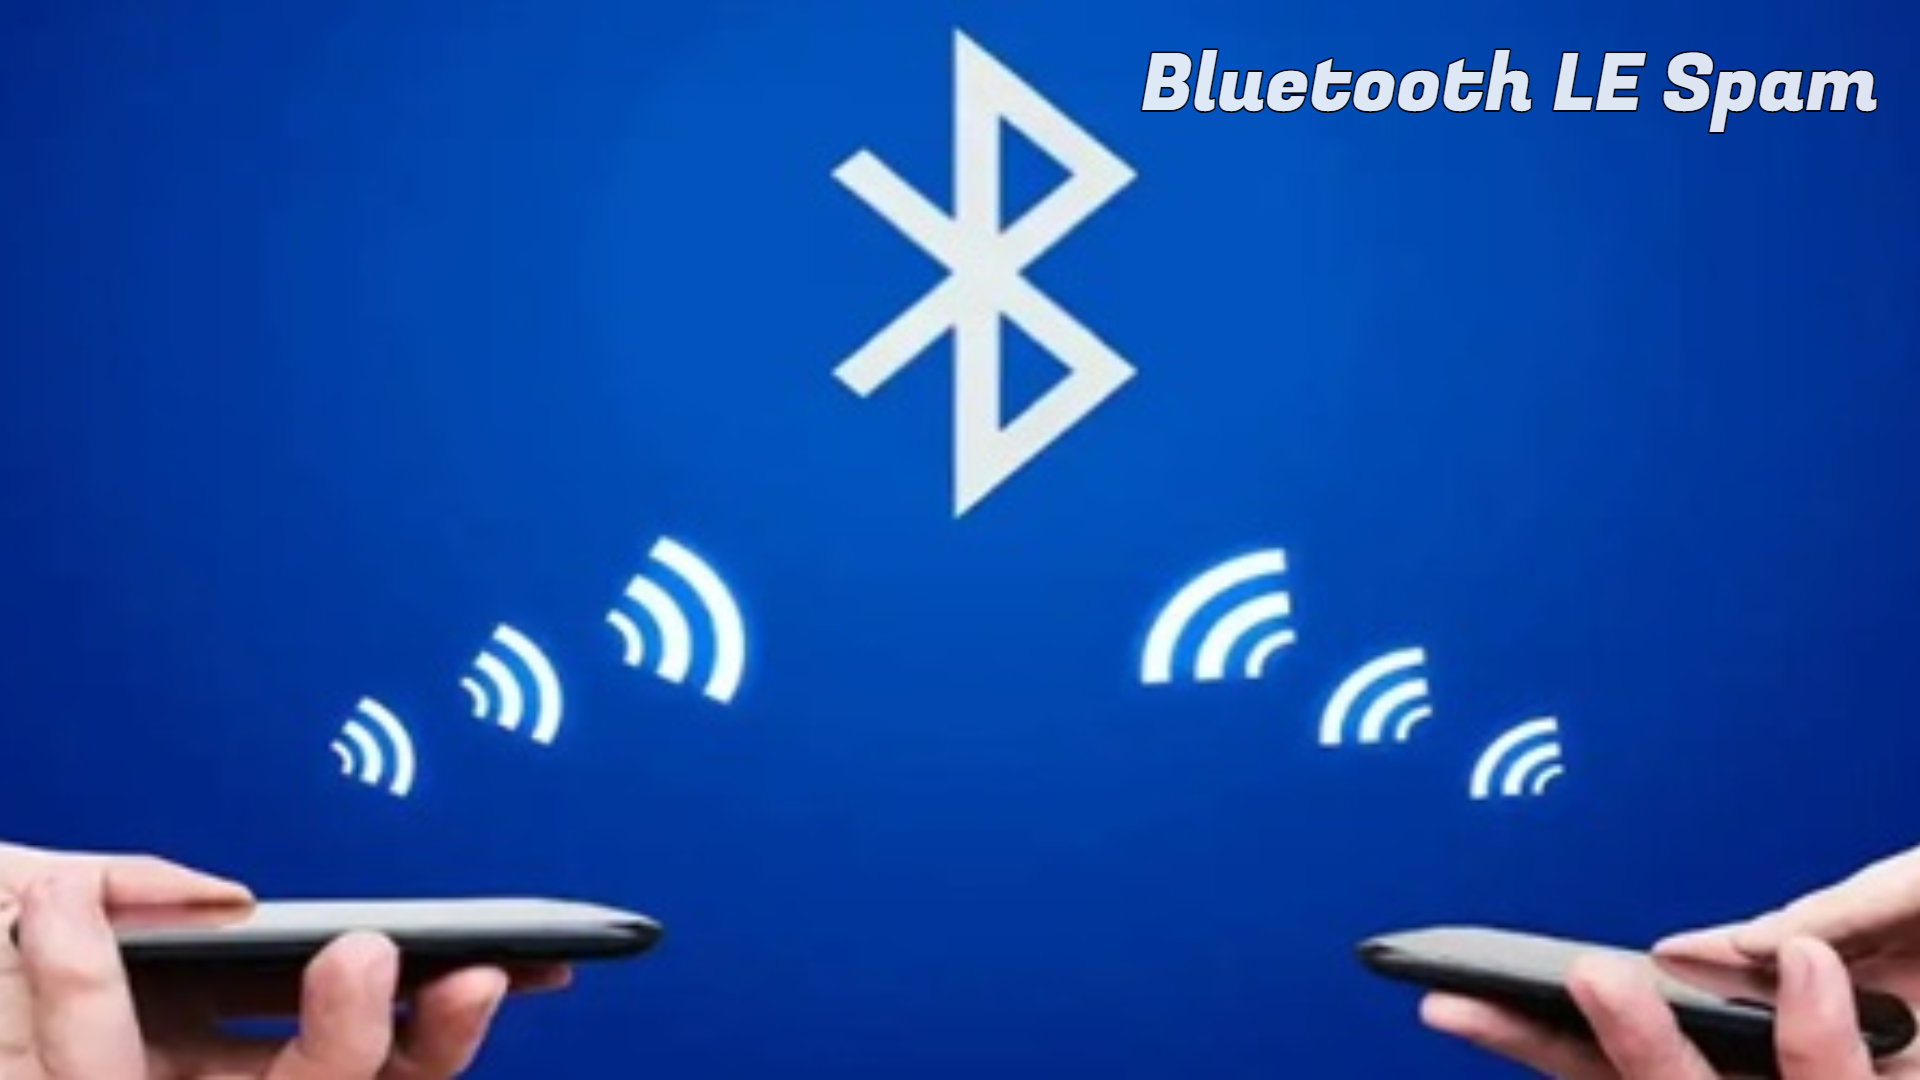 How to Download Bluetooth LE Spam Latest Version on Android image